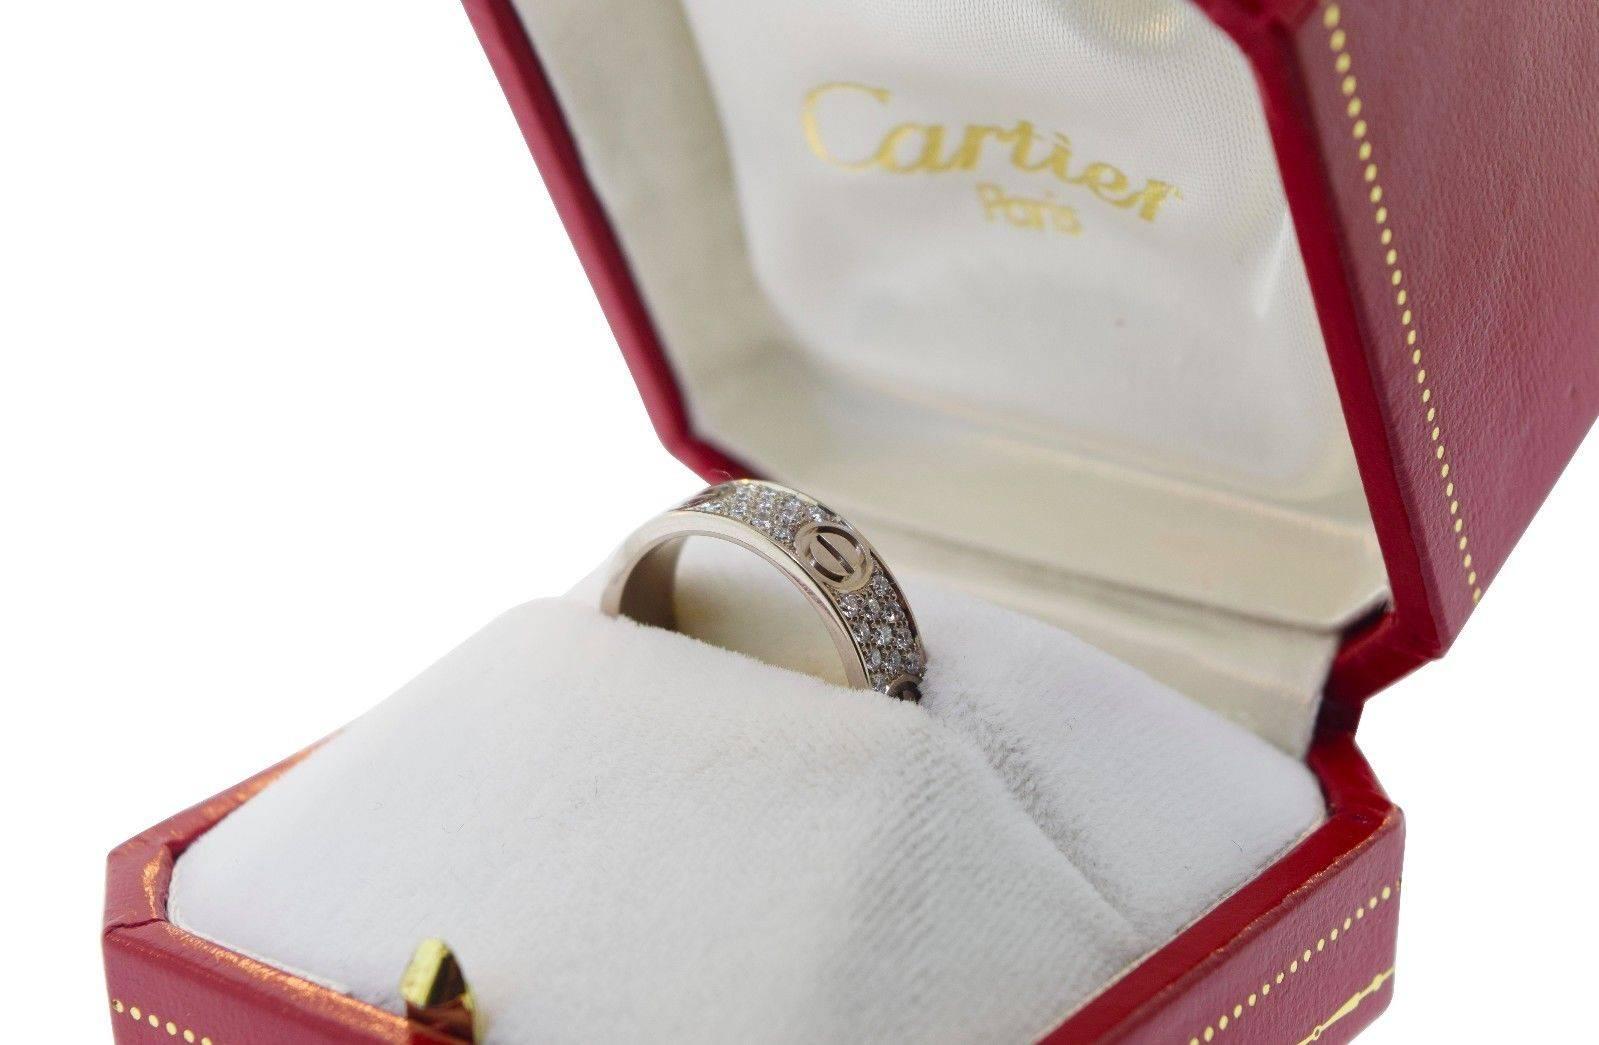 Cartier Diamond Paved LOVE Ring

A child of the 1970s New York, the LOVE collection remains today an iconic symbol of love that transgresses convention. The screw motifs, ideal oval shape and undeniable elegance establish the piece as a timeless